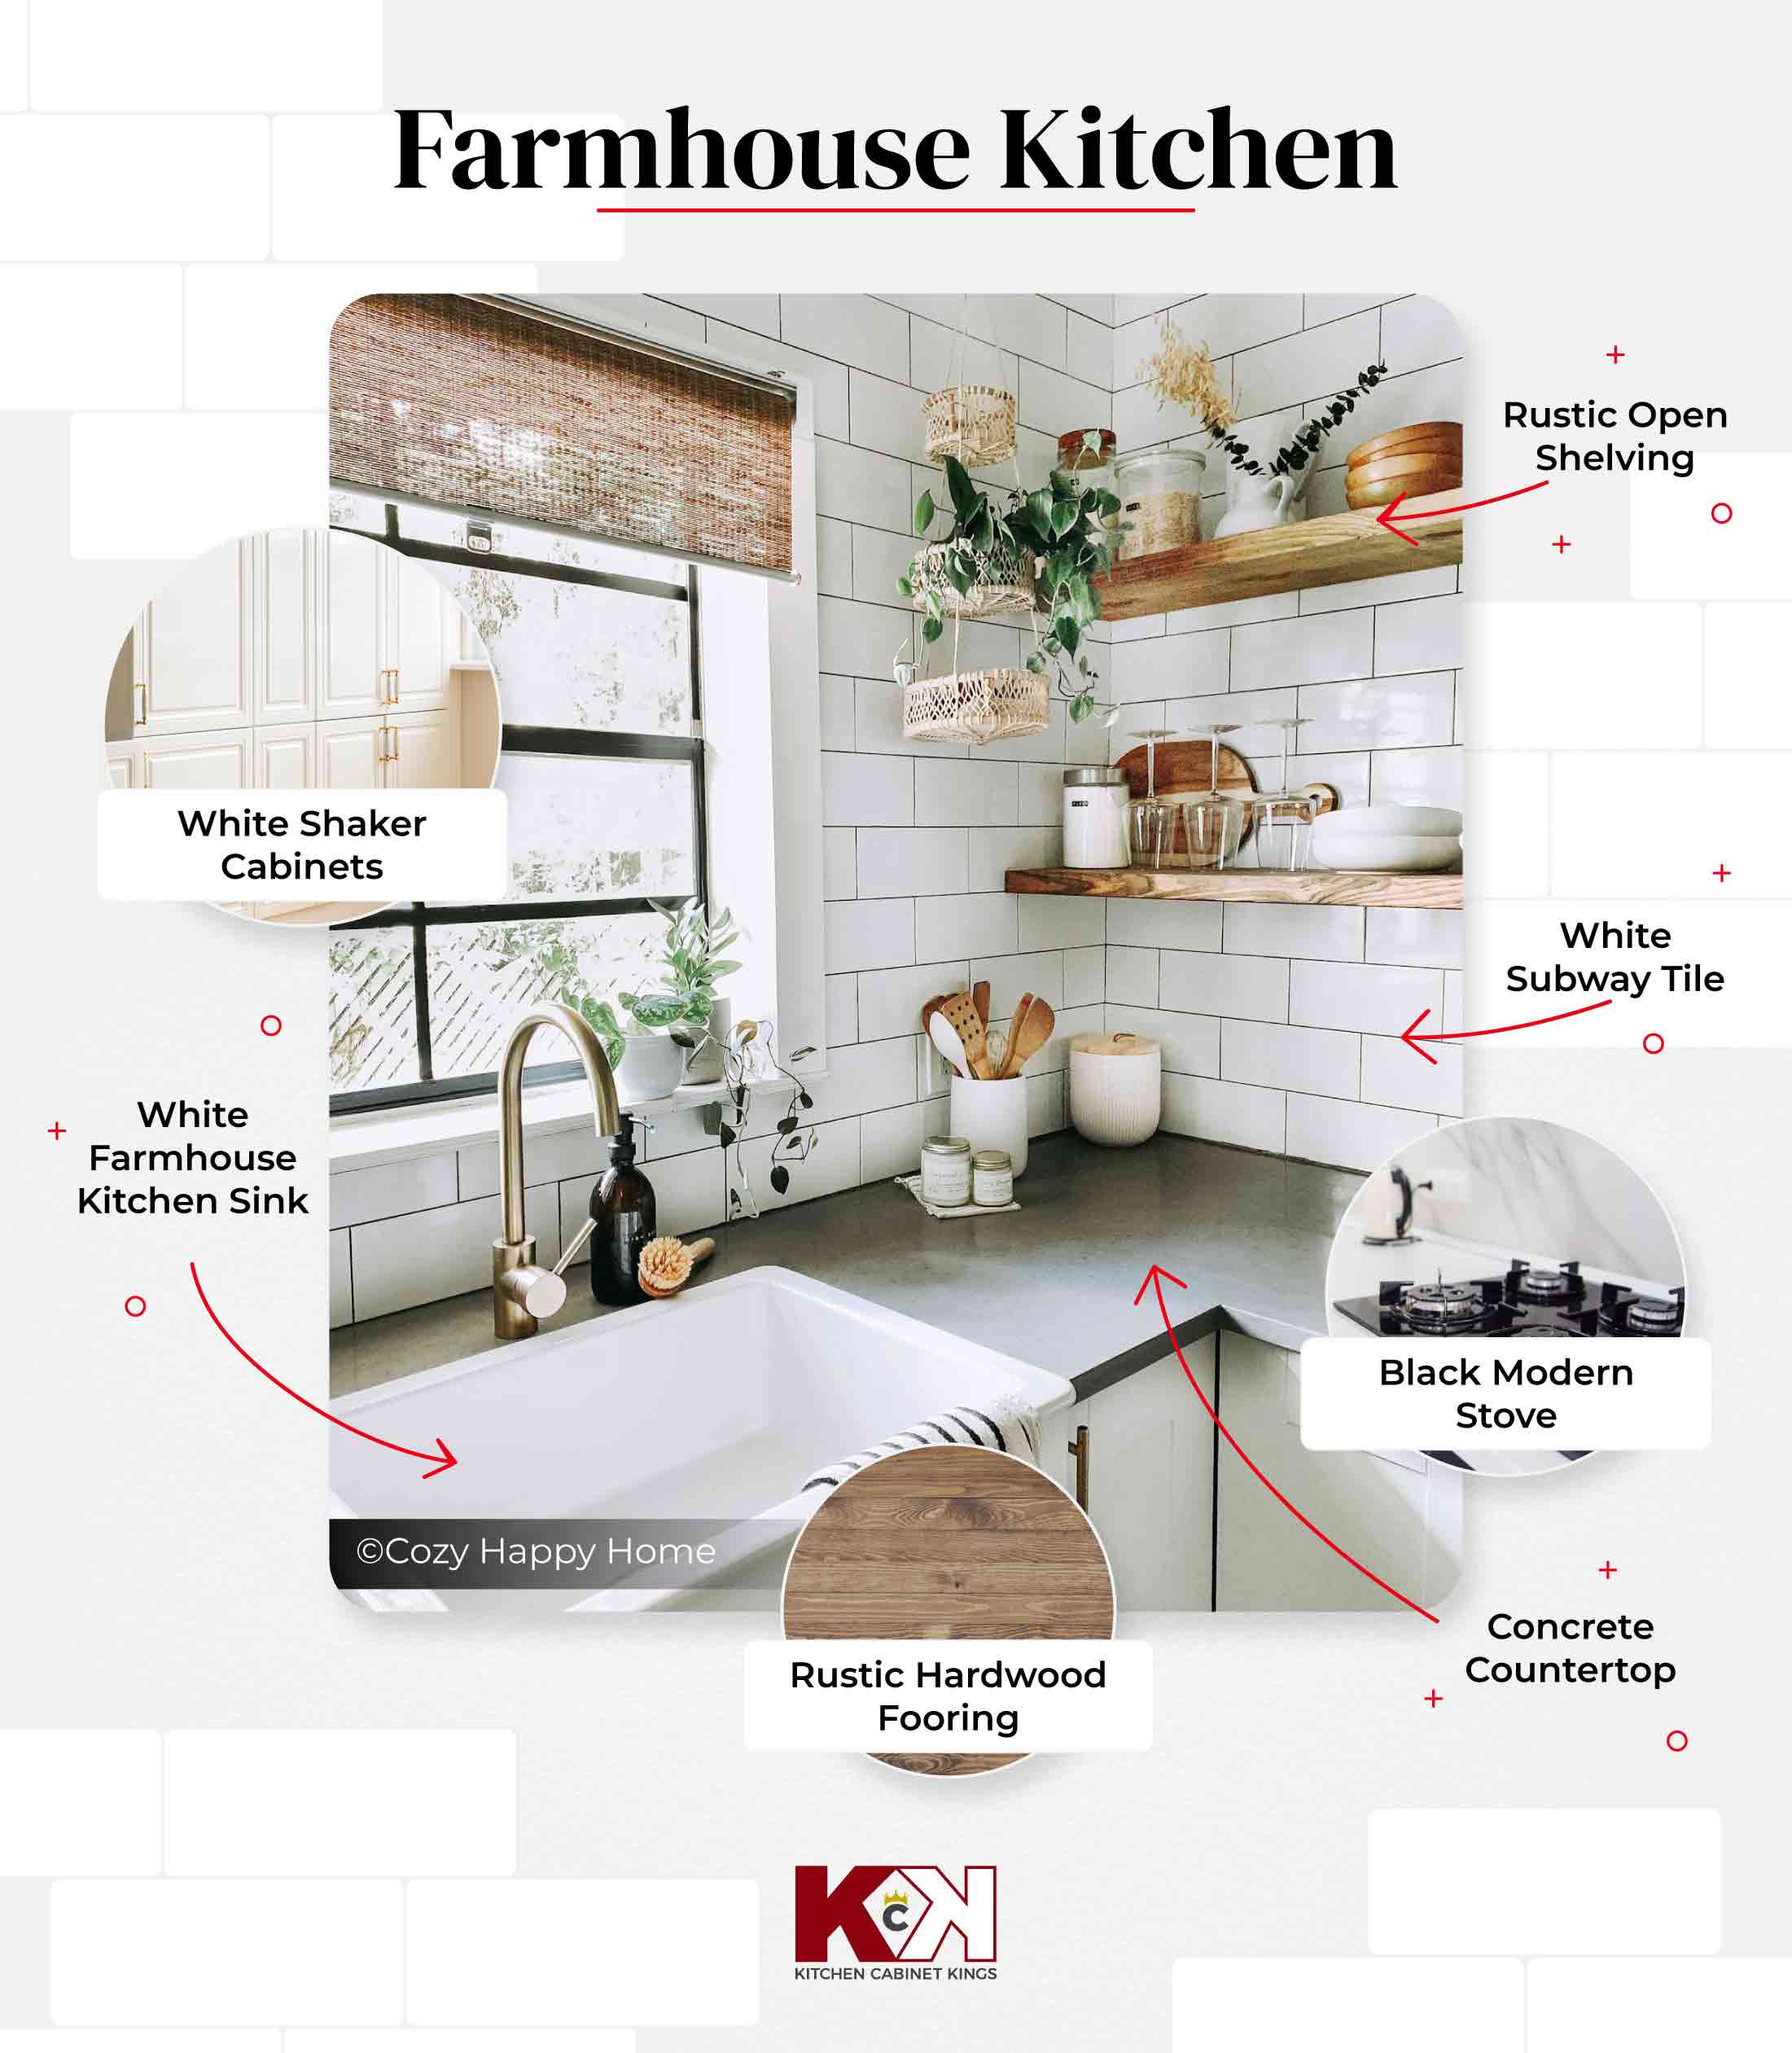 Mood board for farmhouse kitchen with white shaker cabinets, concrete countertops and white subway tile backsplash.